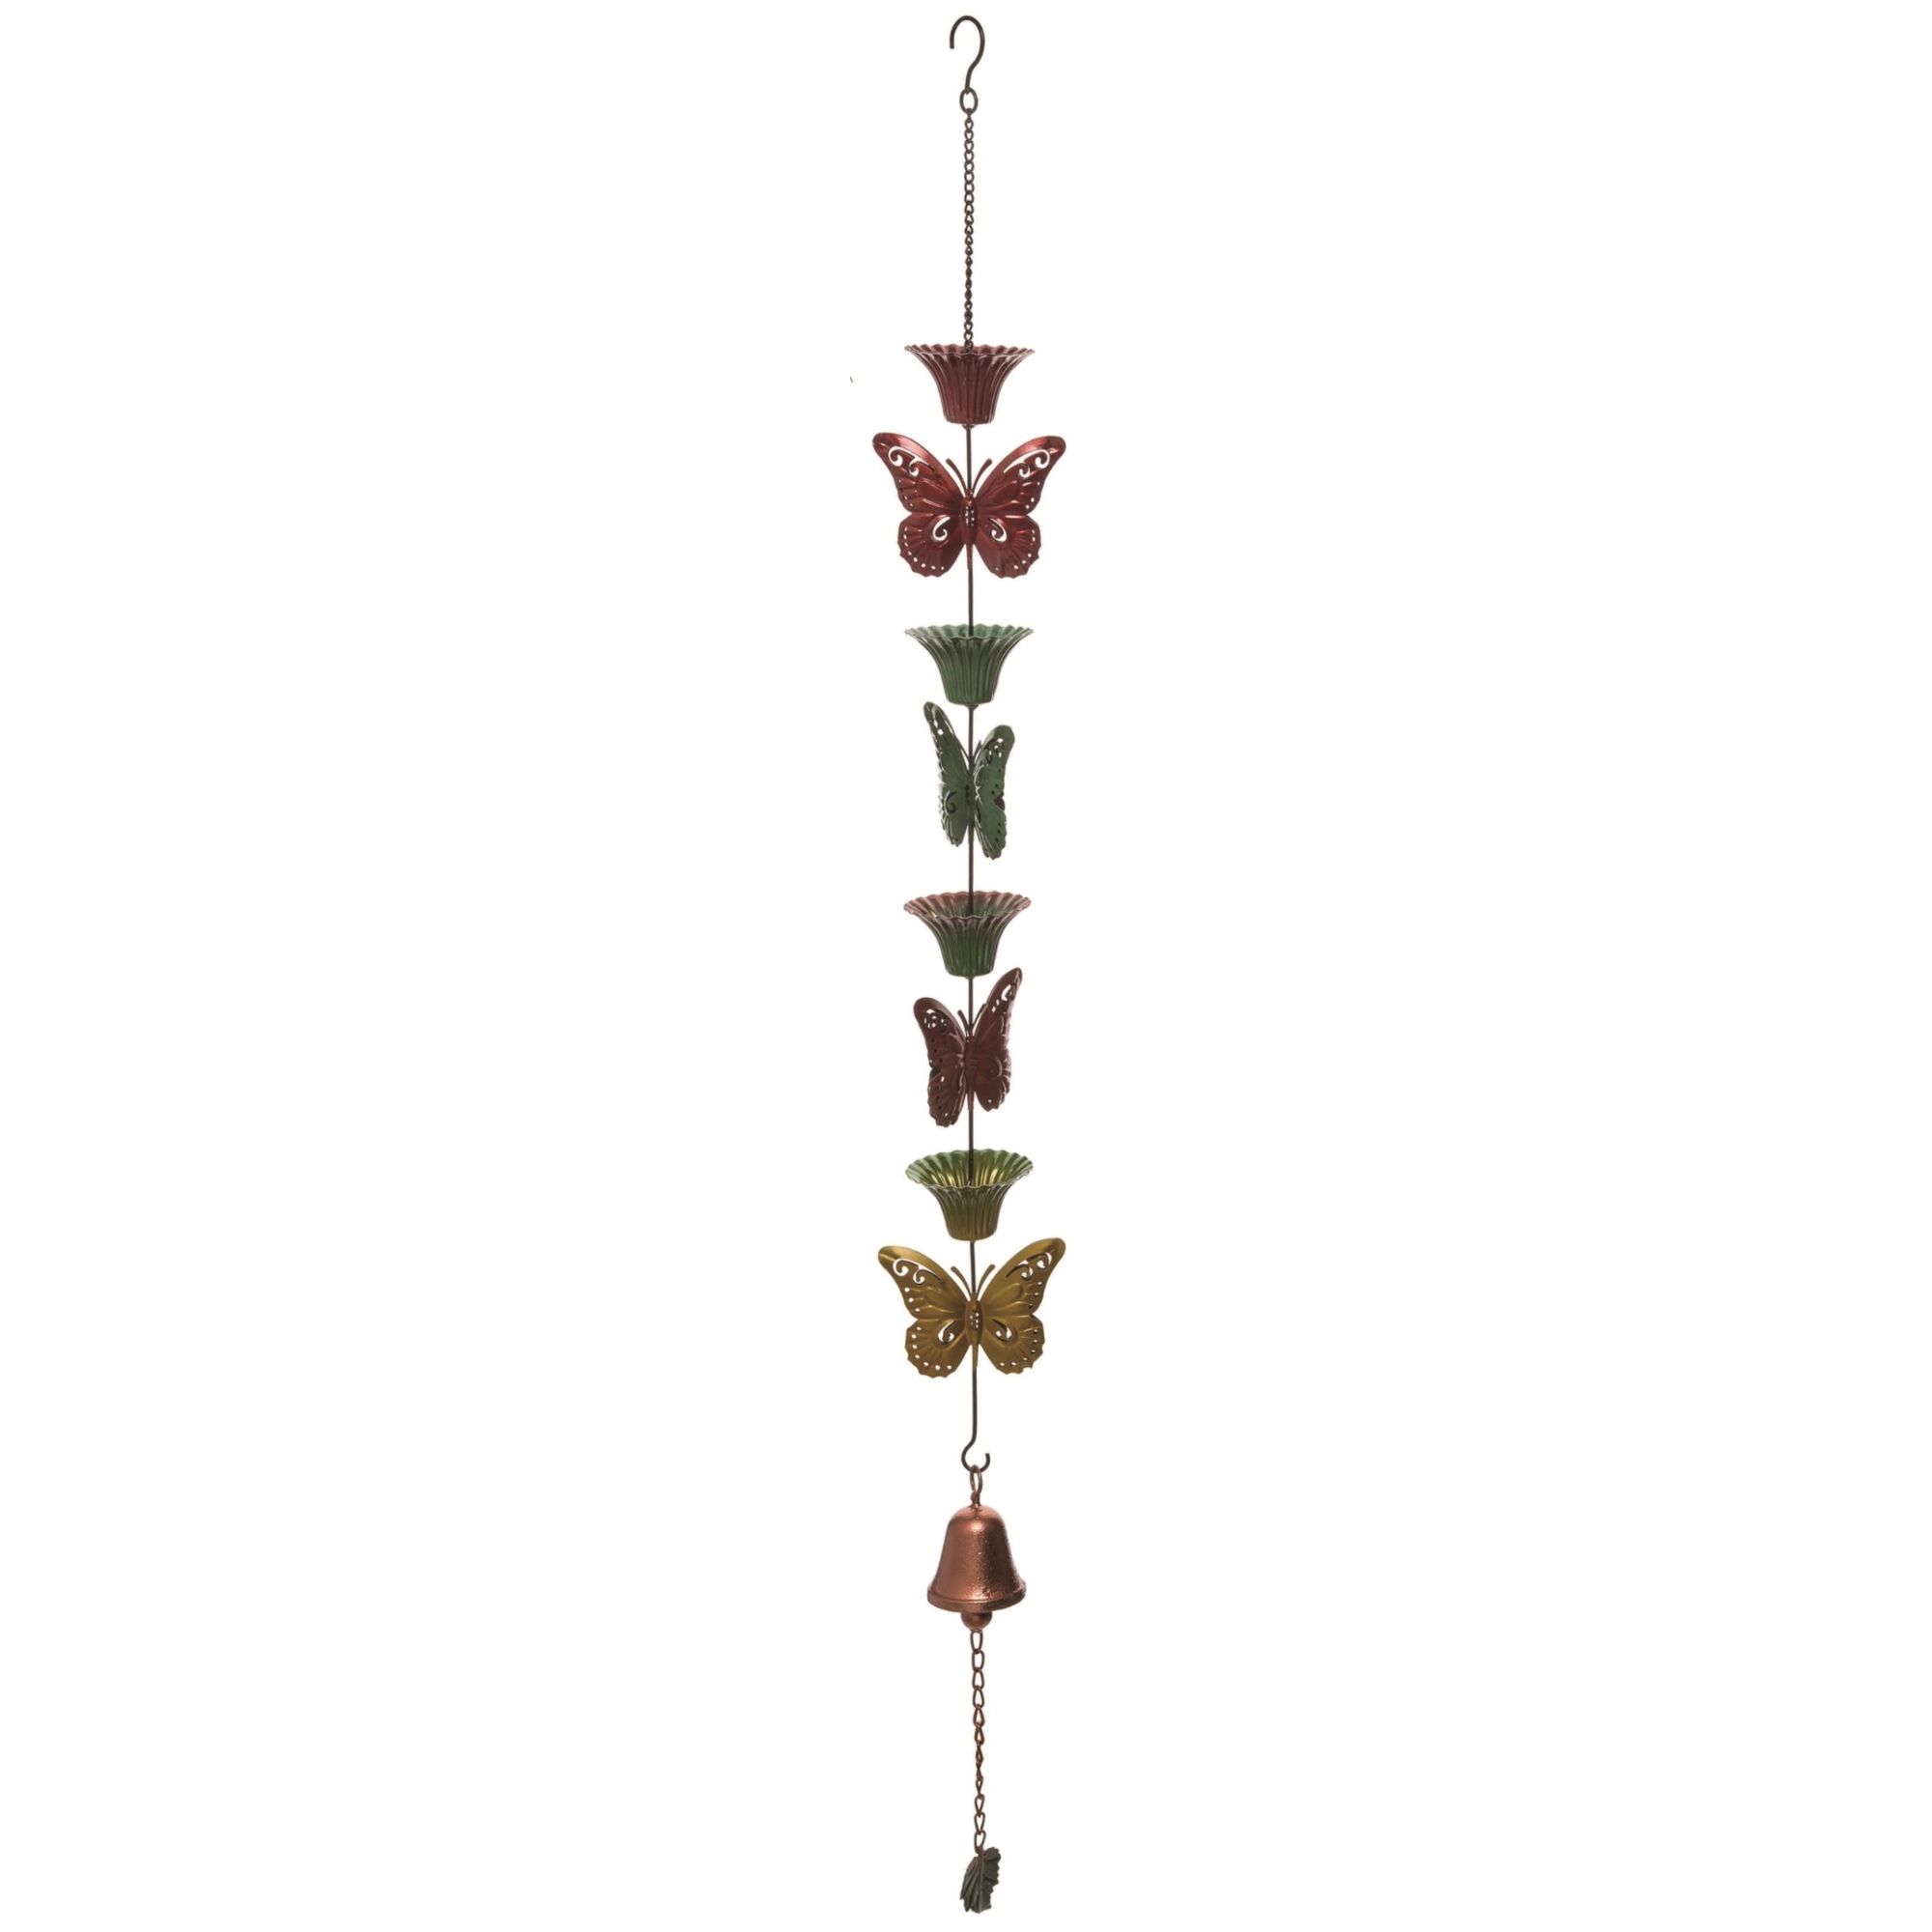 Contemporary Home Living 47.5" Bronze Spring Butterfly and Flowers Outdoor Rain Chain - image 1 of 1